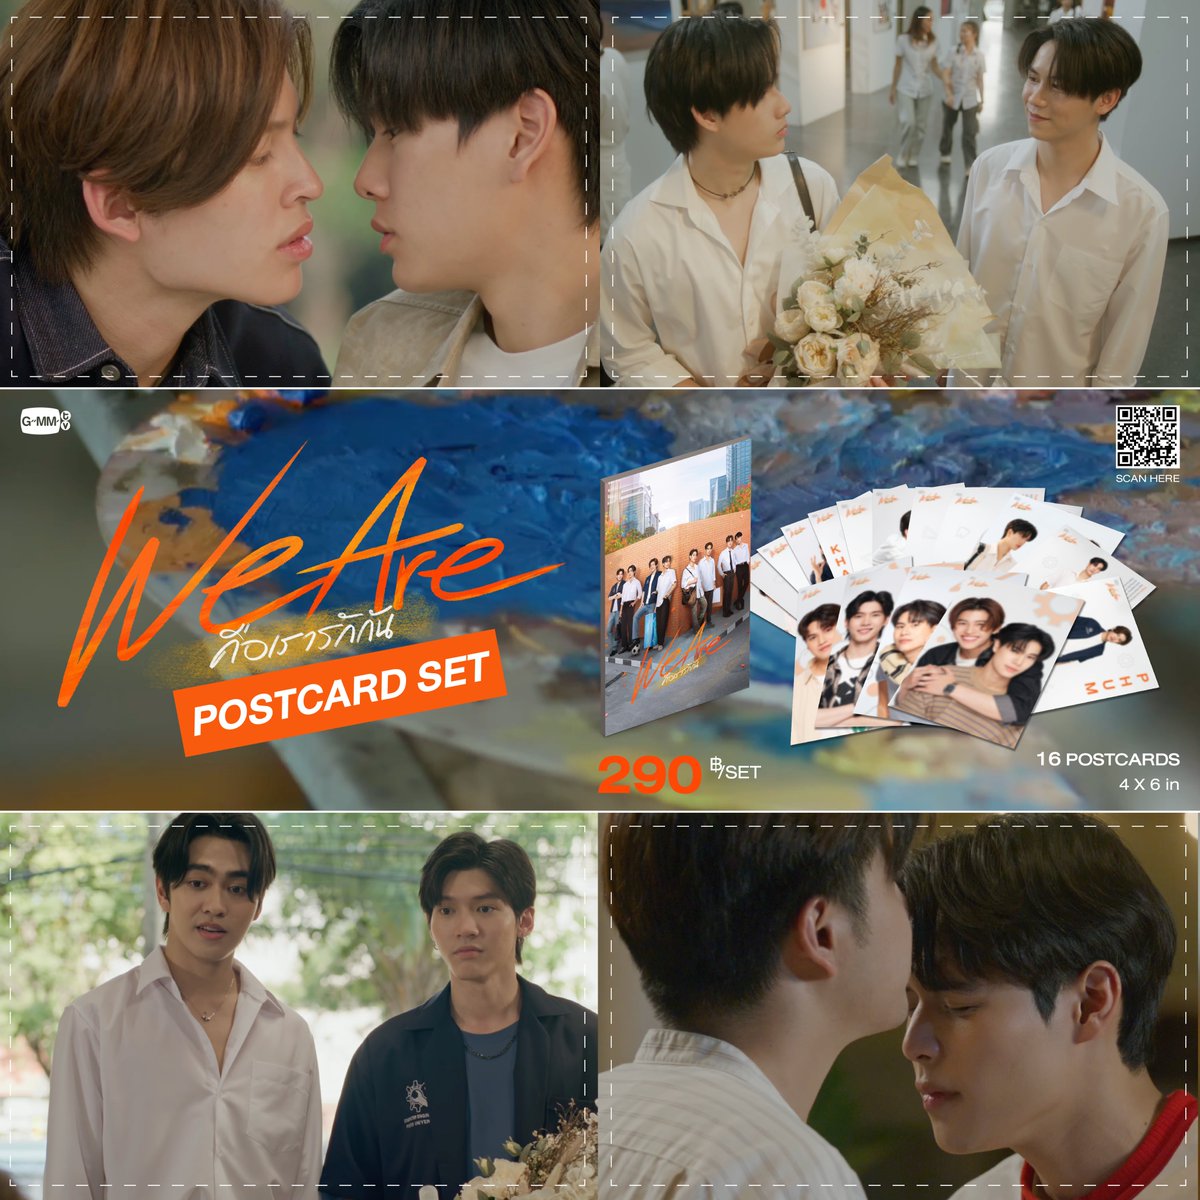 We truly believe everyone should have this WE ARE postcard set in their possession. WE ARE POSTCARD SET | โปสการ์ดเซ็ต WE ARE คือเรารักกัน gmm-tv.com/shop/we-are-po… #WeAreSeriesEP6 #GMMTV